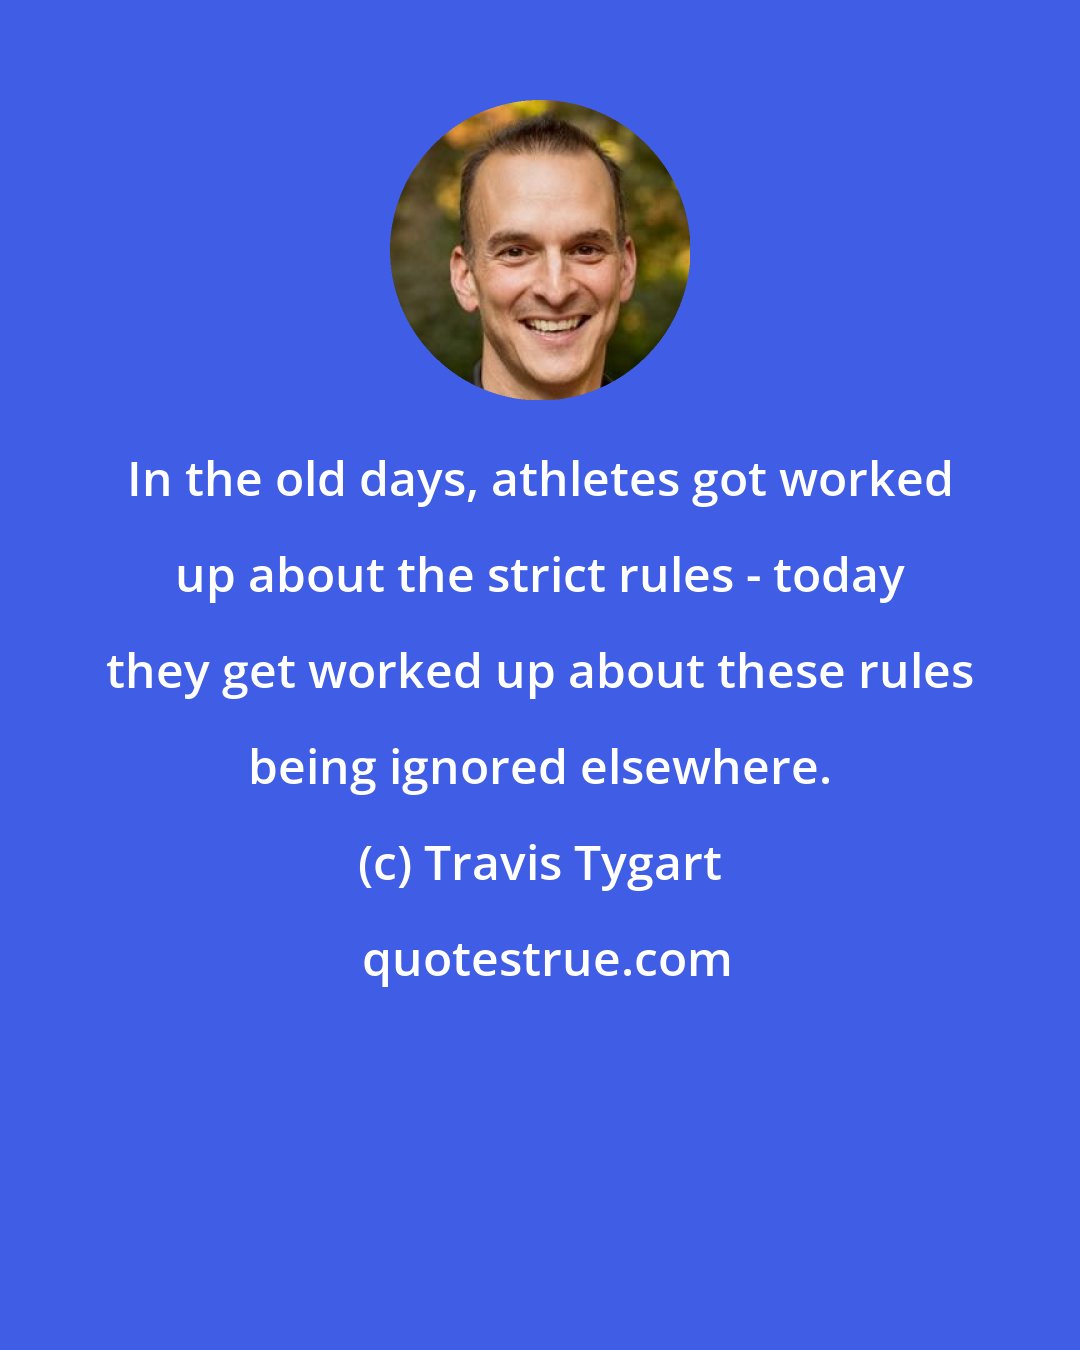 Travis Tygart: In the old days, athletes got worked up about the strict rules - today they get worked up about these rules being ignored elsewhere.